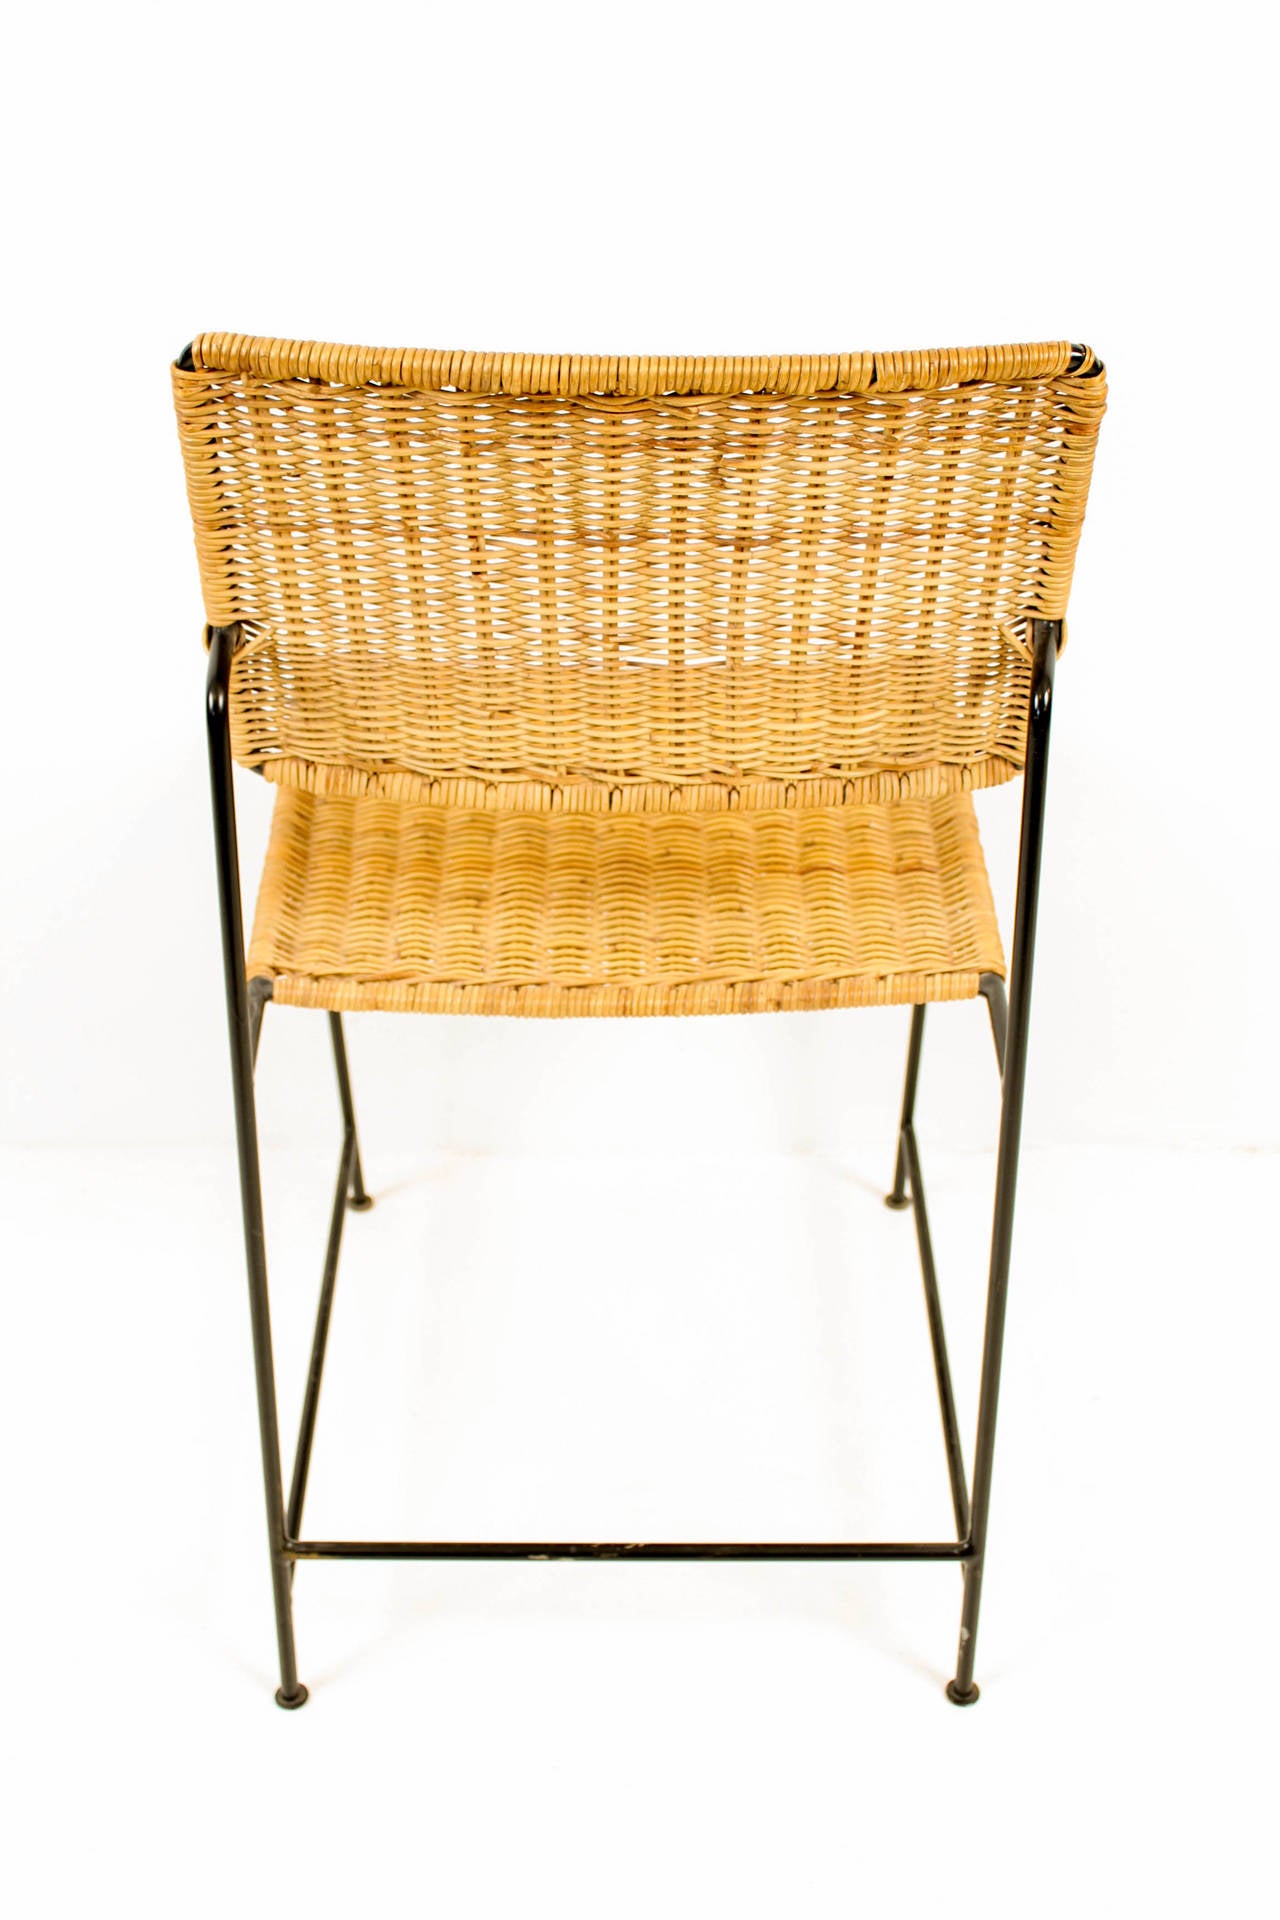 Mid-20th Century Rare Set of Six Rattan and Wire Chairs by Herta-Maria Witzemann